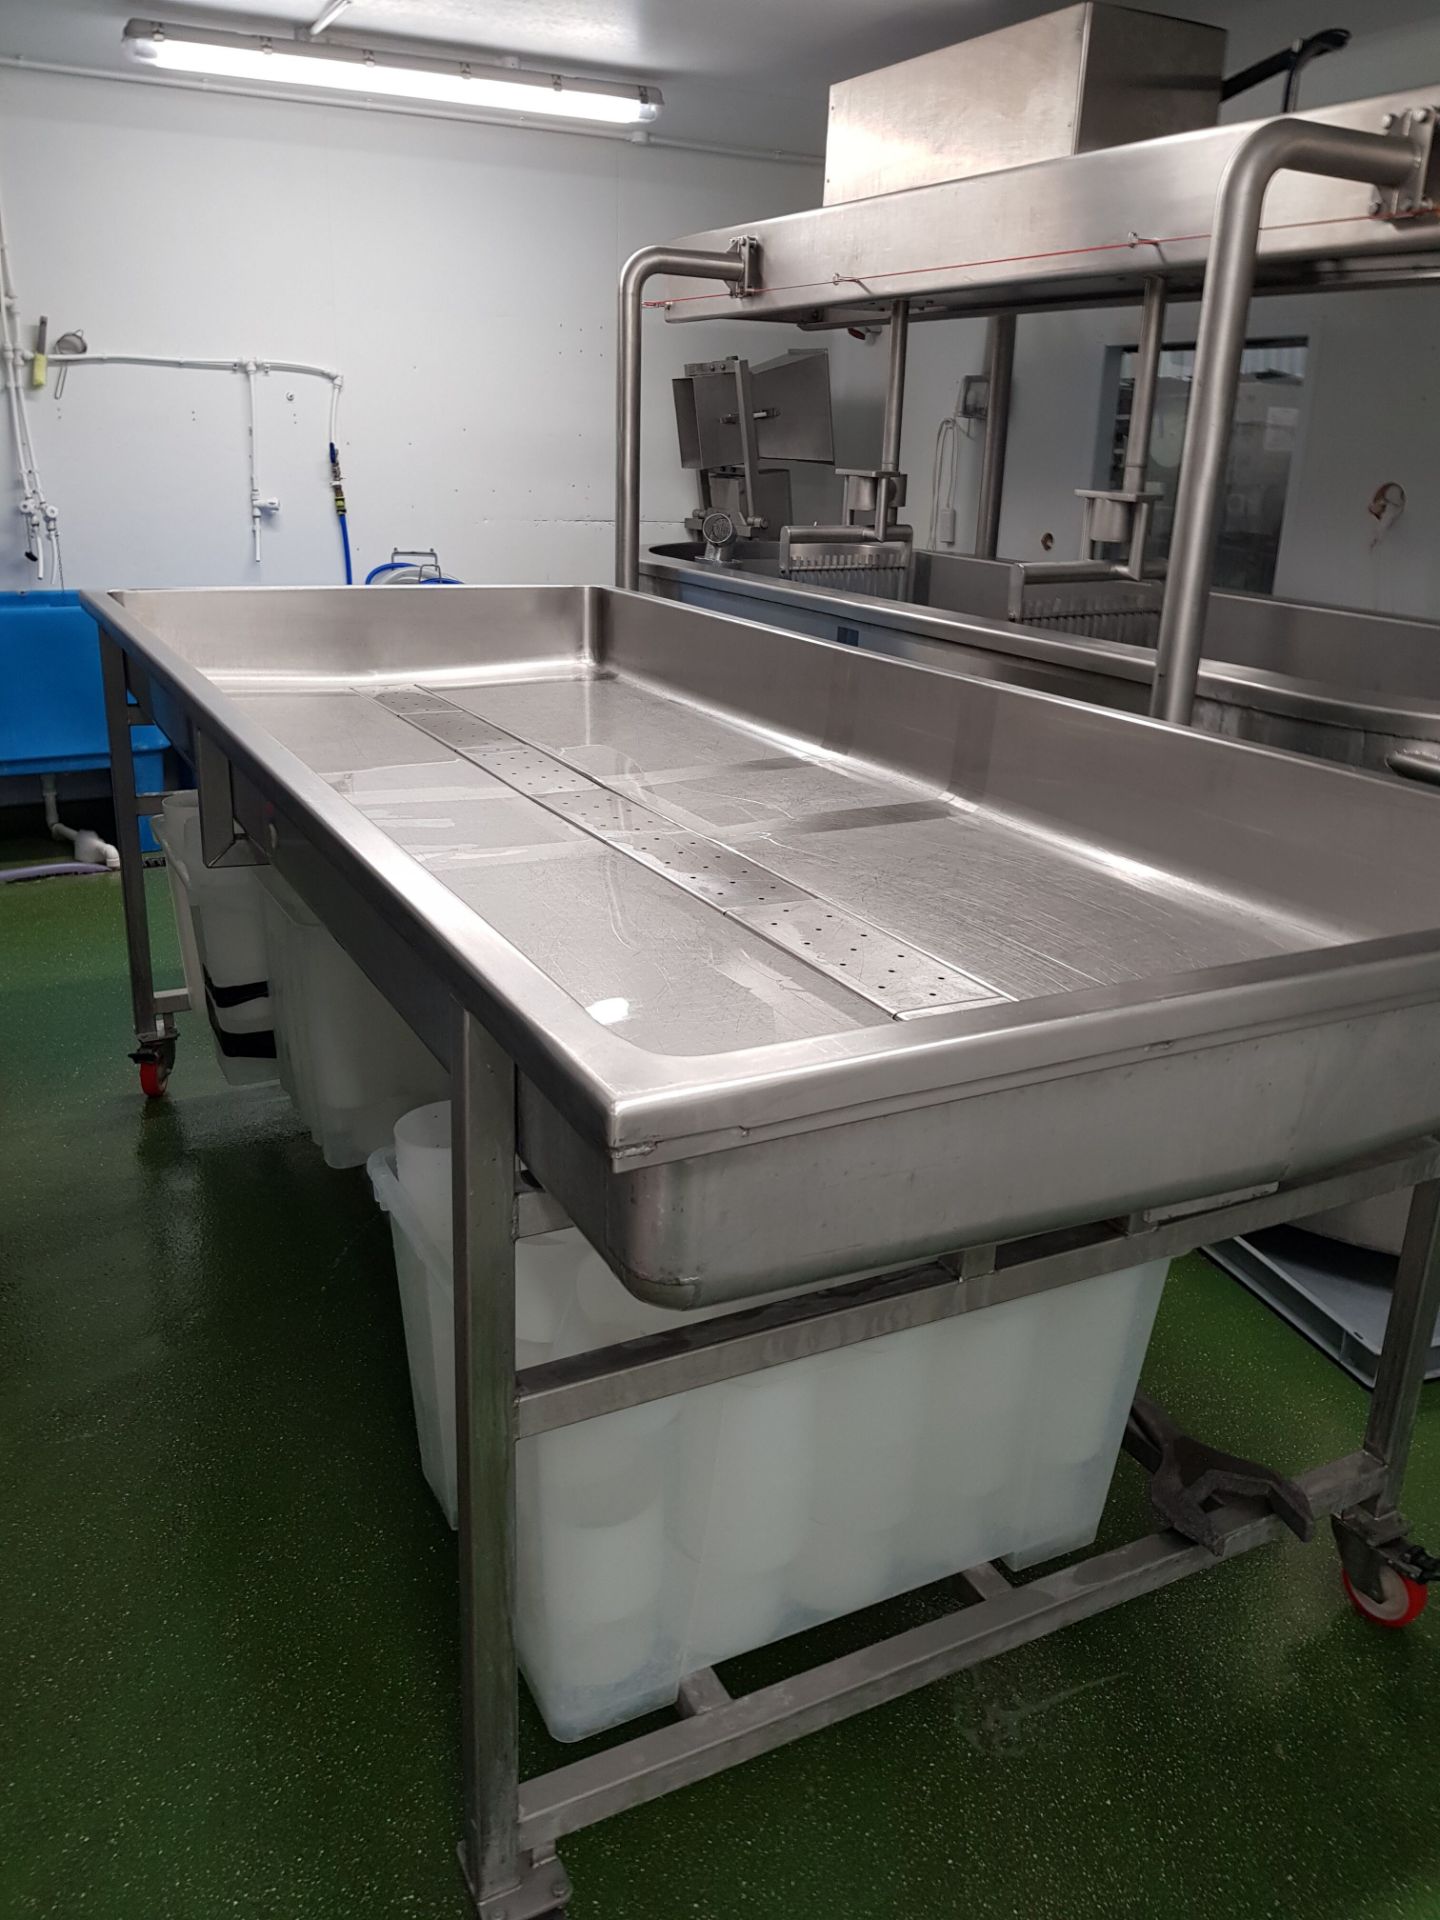 S/s draining table. 2017. Mobile unit. LO £100. - Image 2 of 5